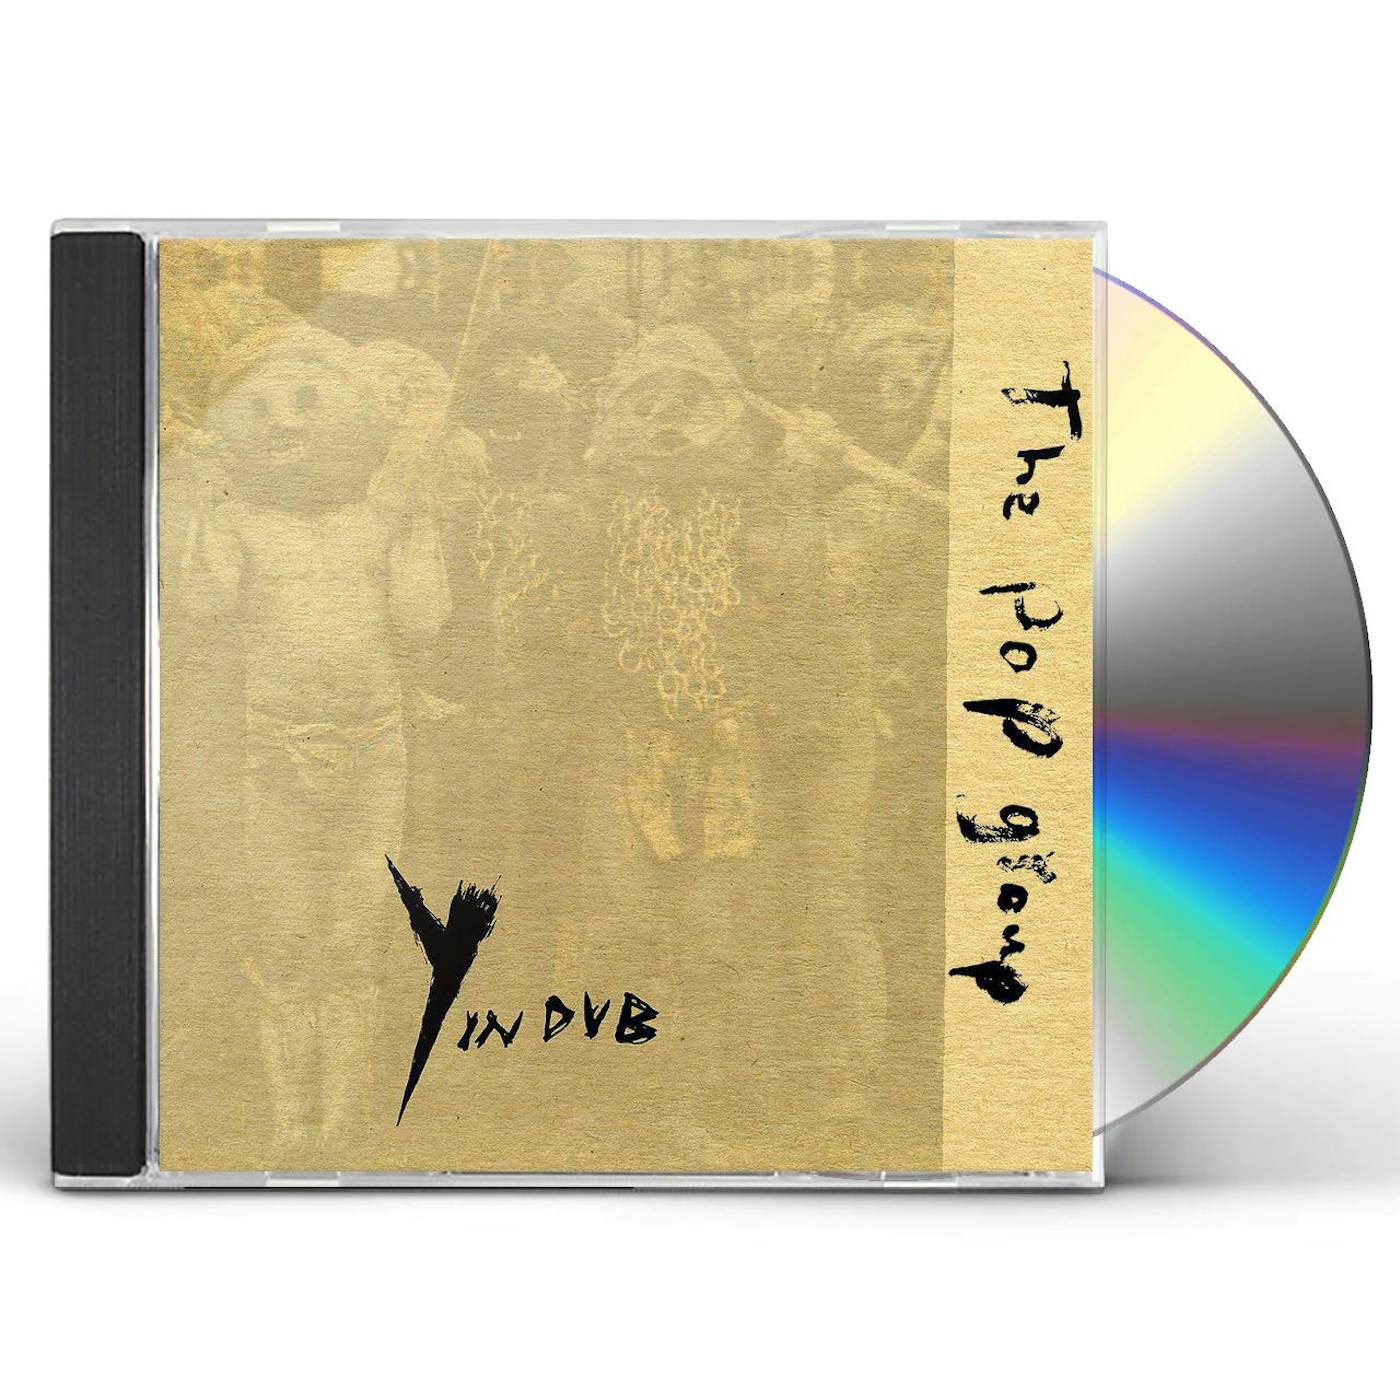 The Pop Group Y IN DUB CD